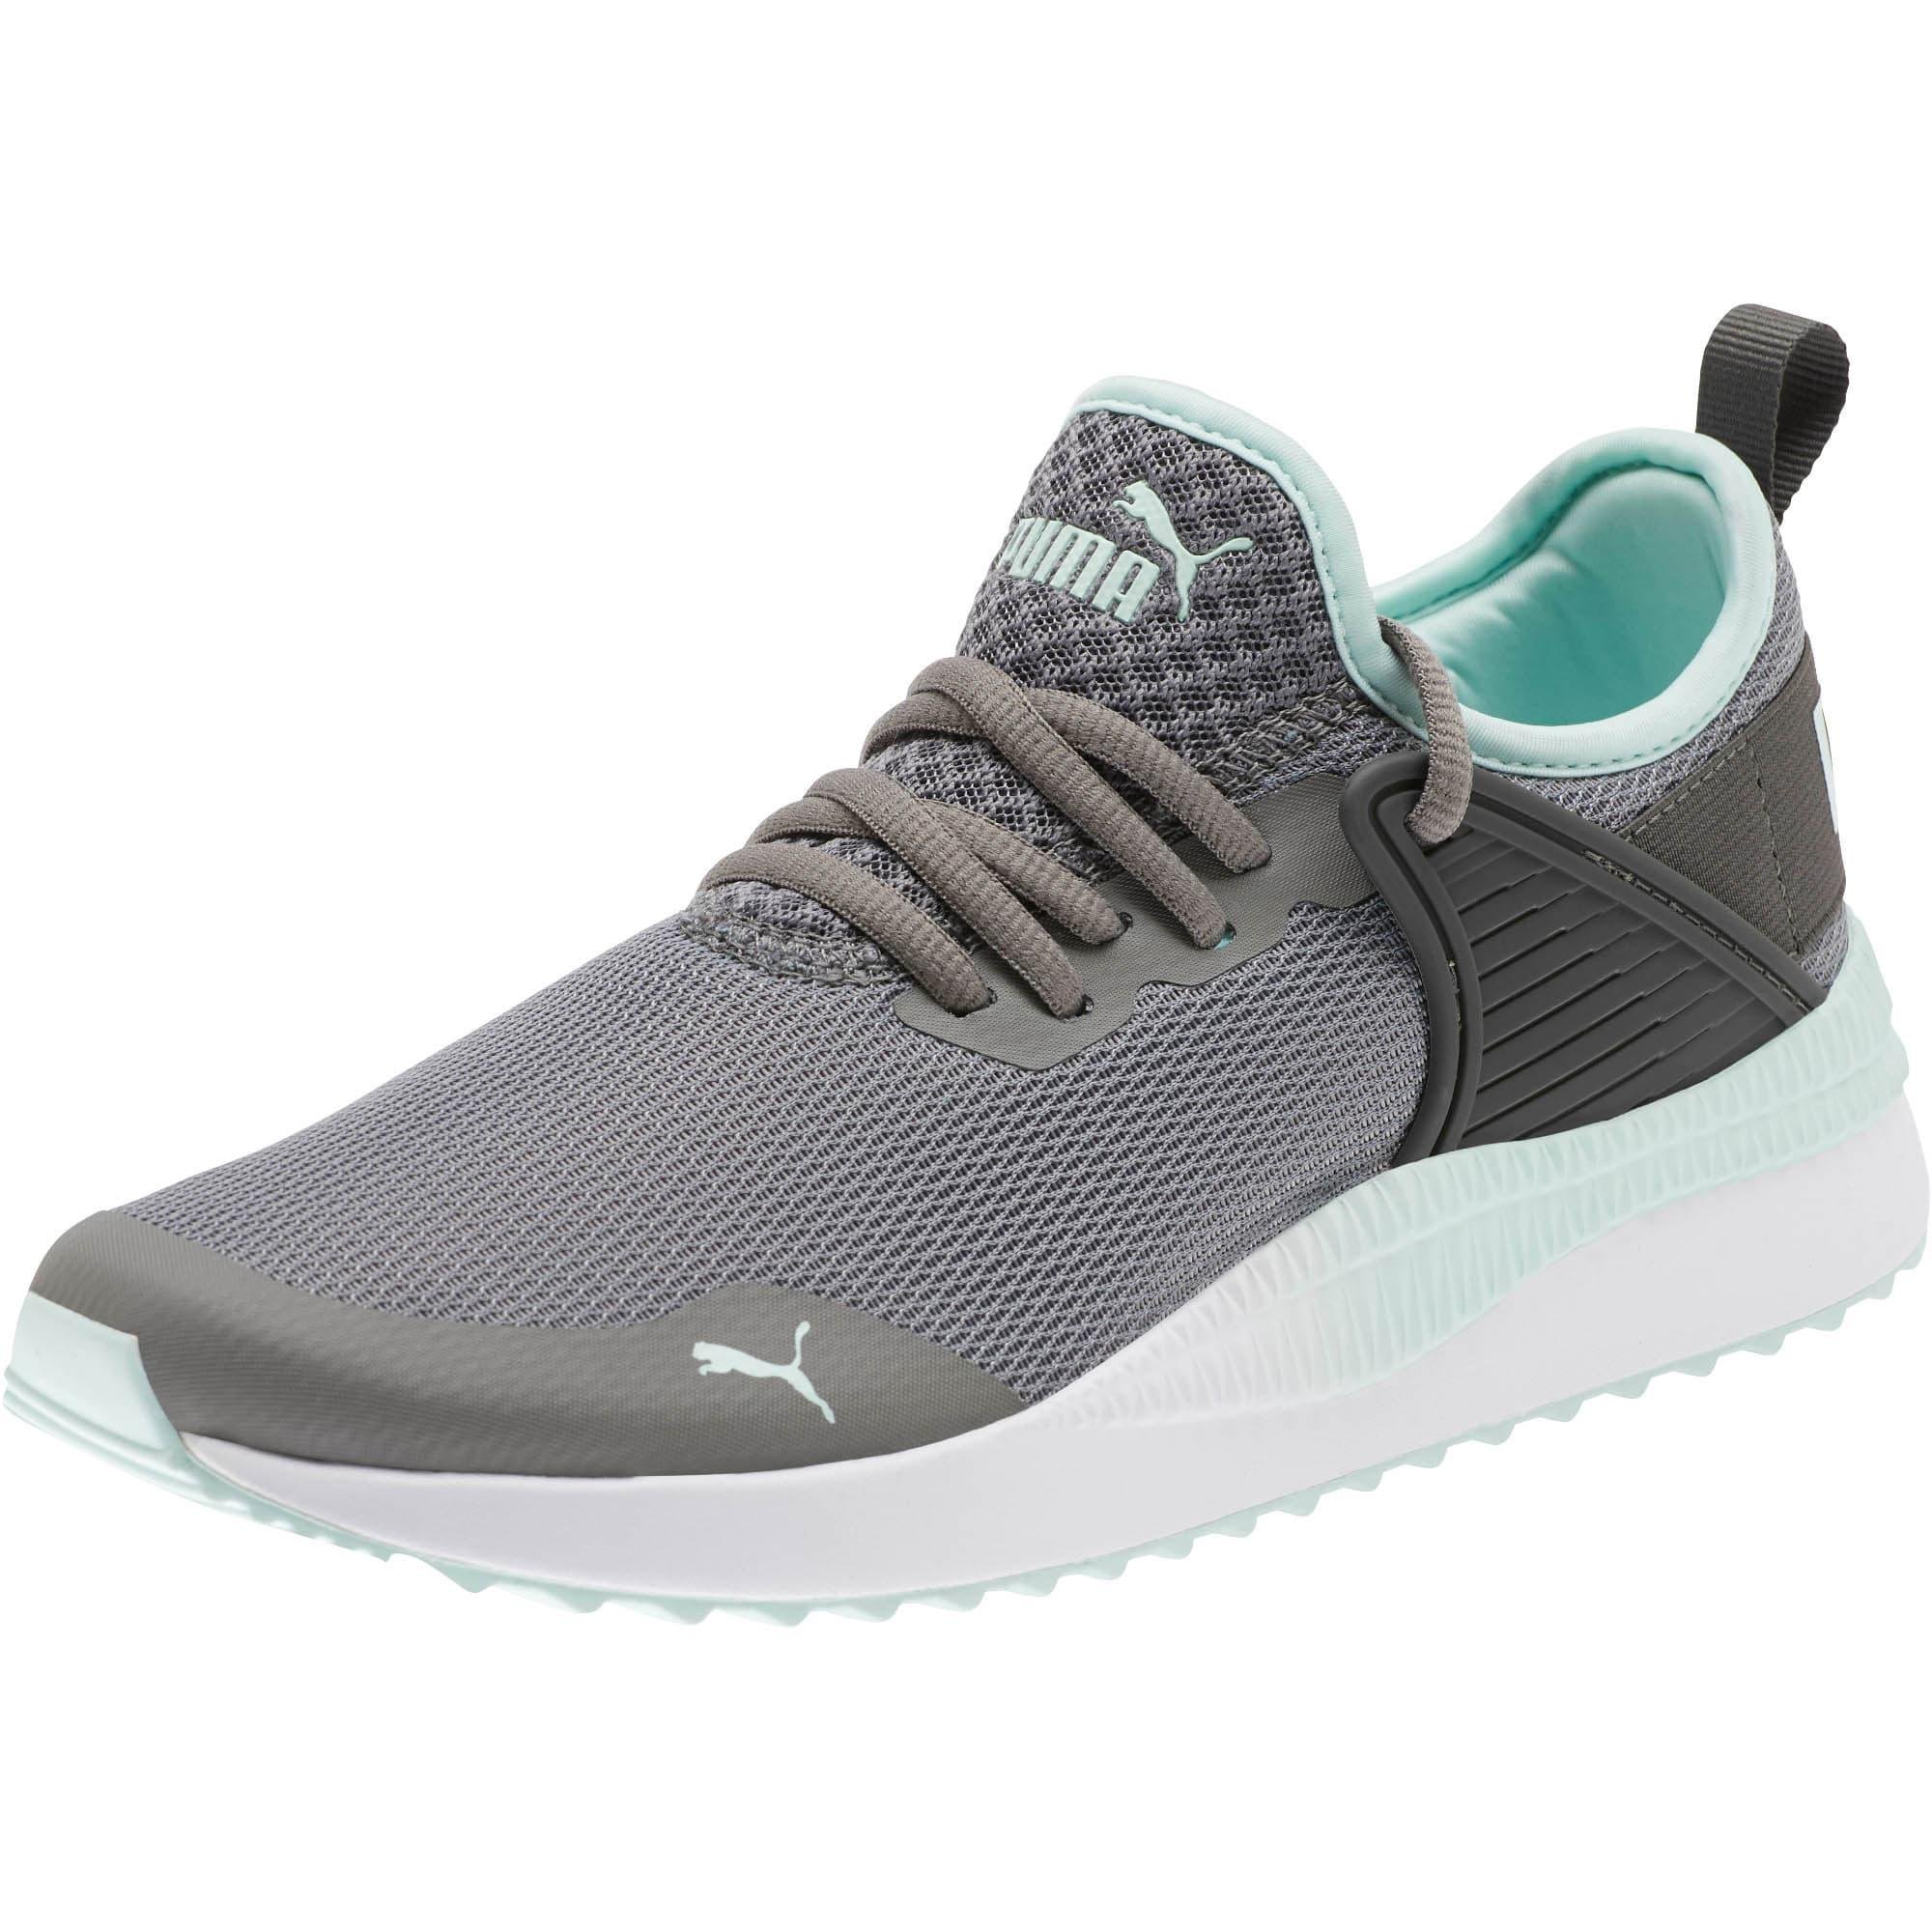 PUMA Synthetic Pacer Next Cage Fade Women's Sneakers in 02 (Gray) - Lyst